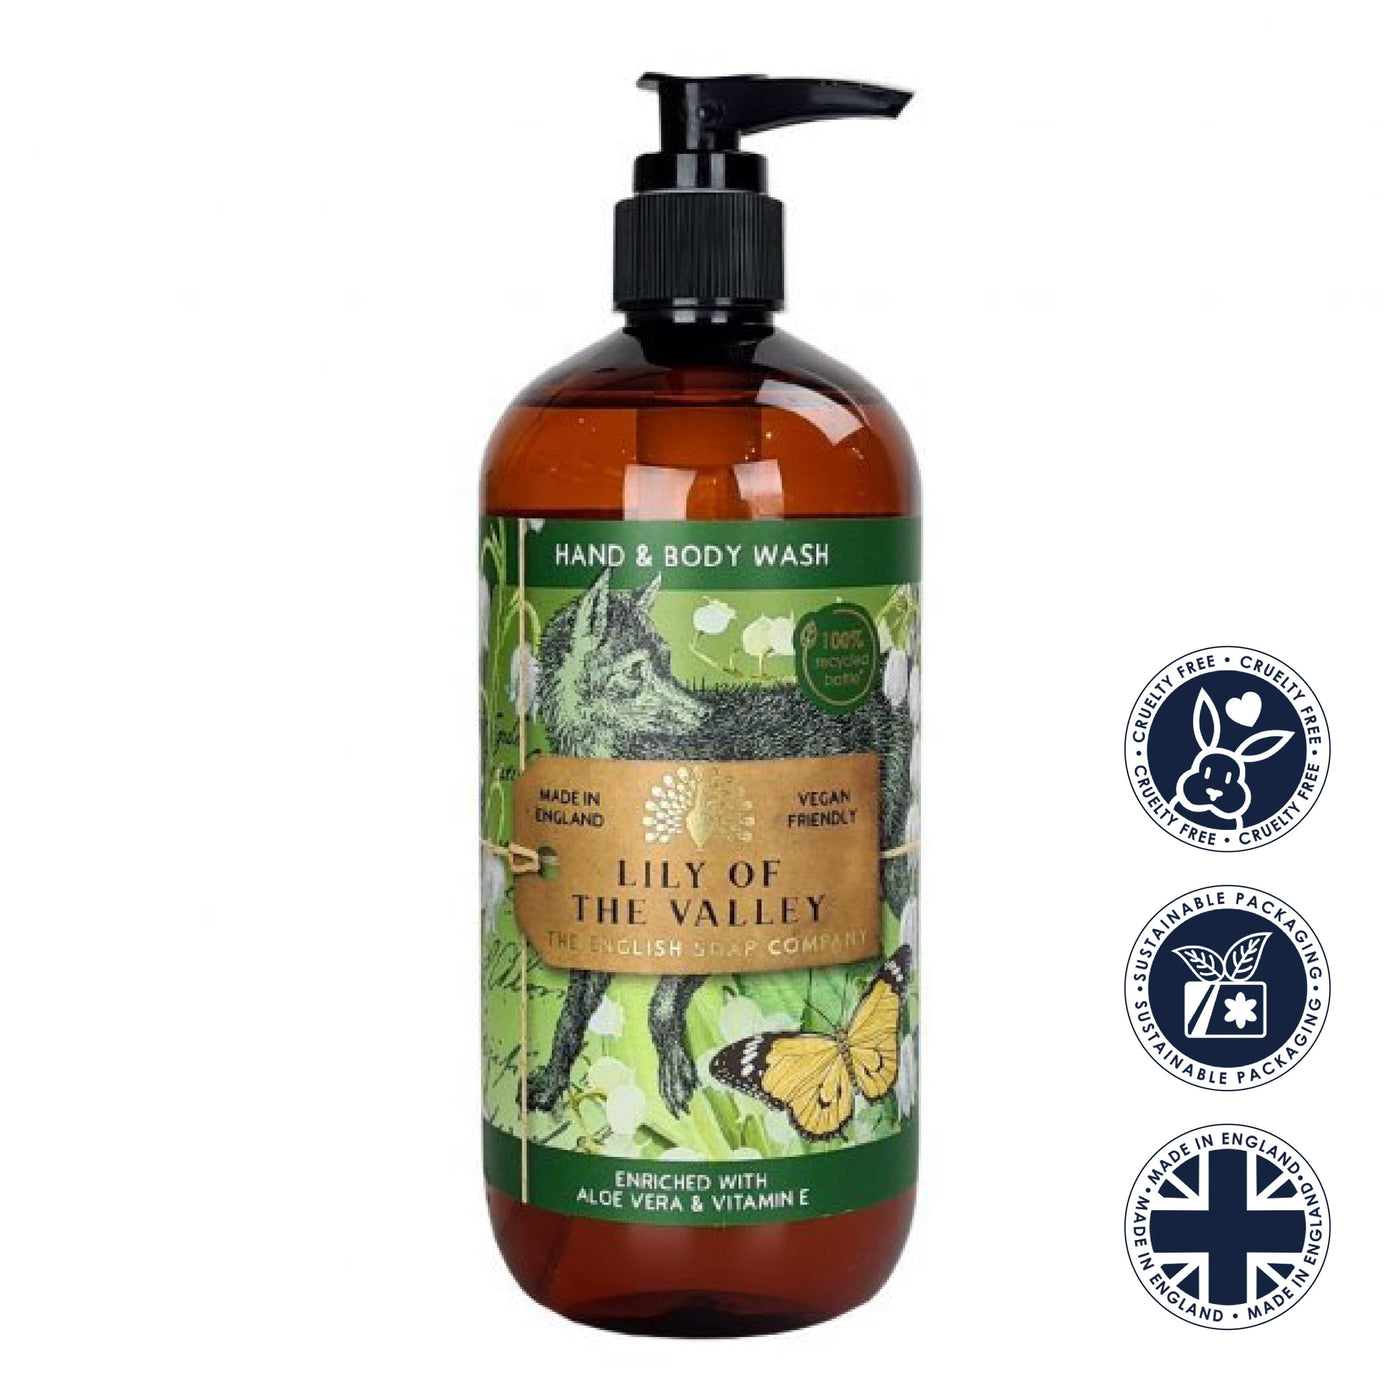 Lily of the Valley Hand & Body Wash - Anniversary Collection from our Liquid Hand & Body Soap collection by The English Soap Company